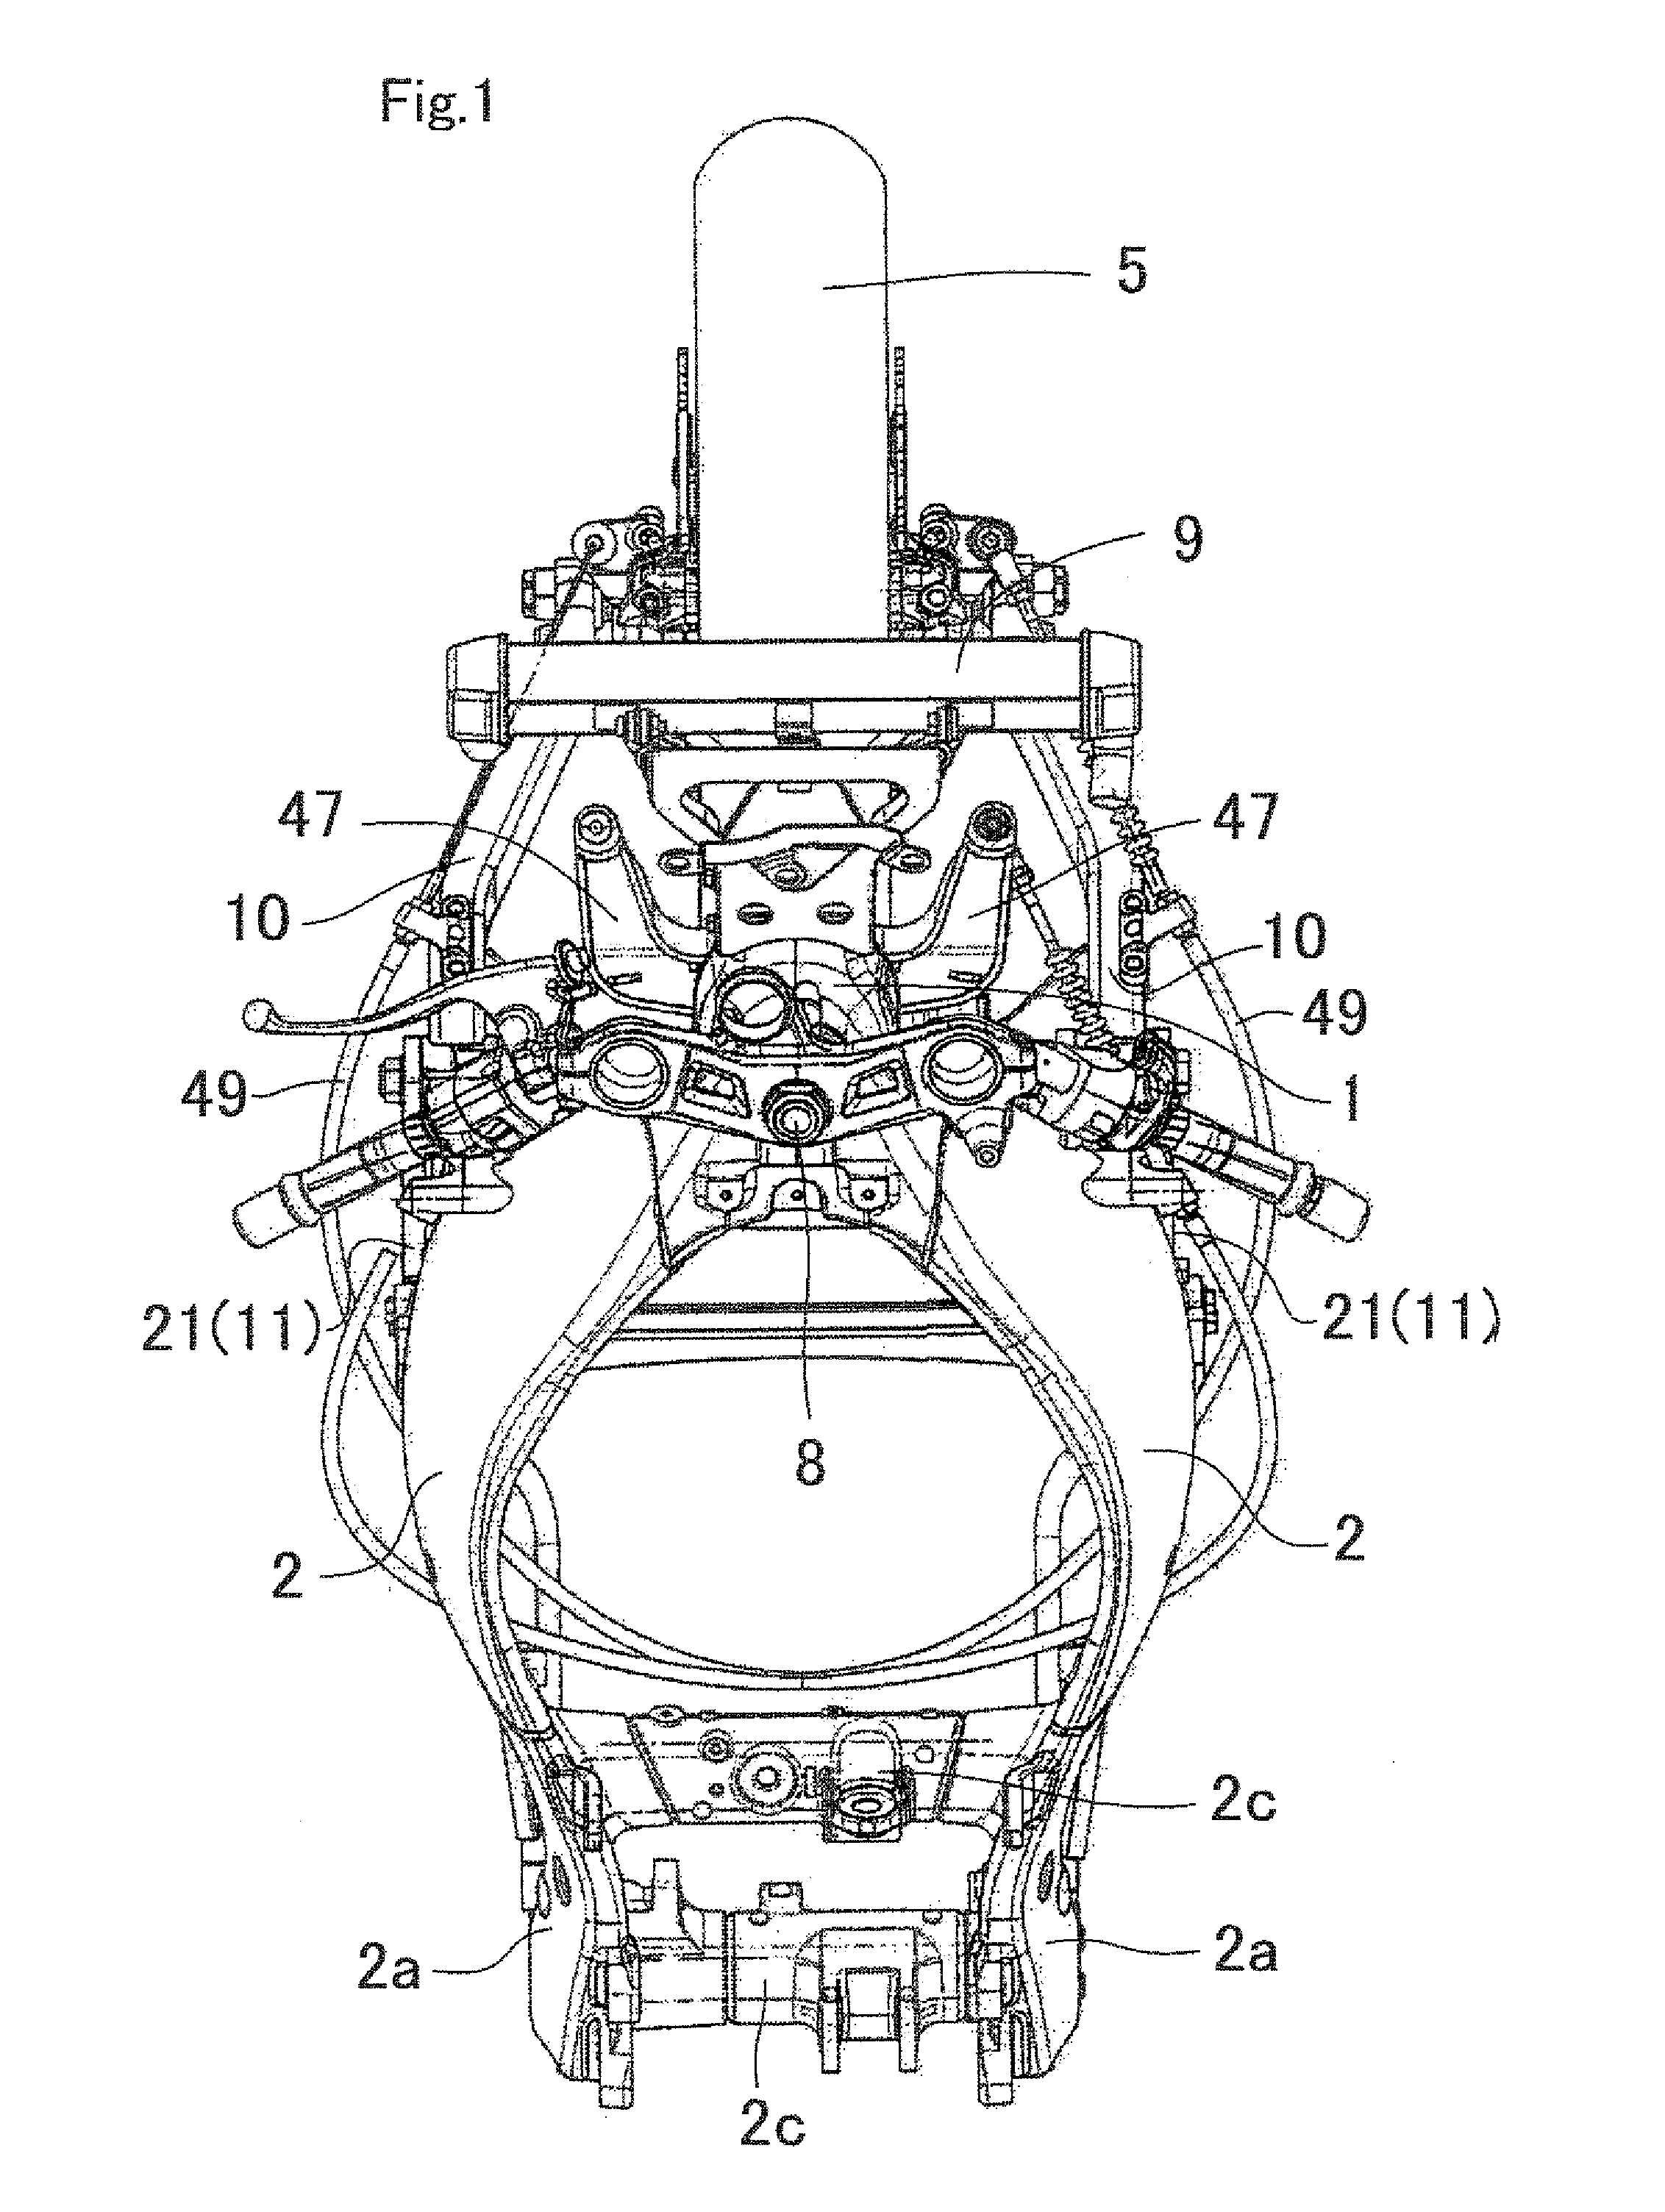 Front wheel supporting structure for straddle-type vehicle